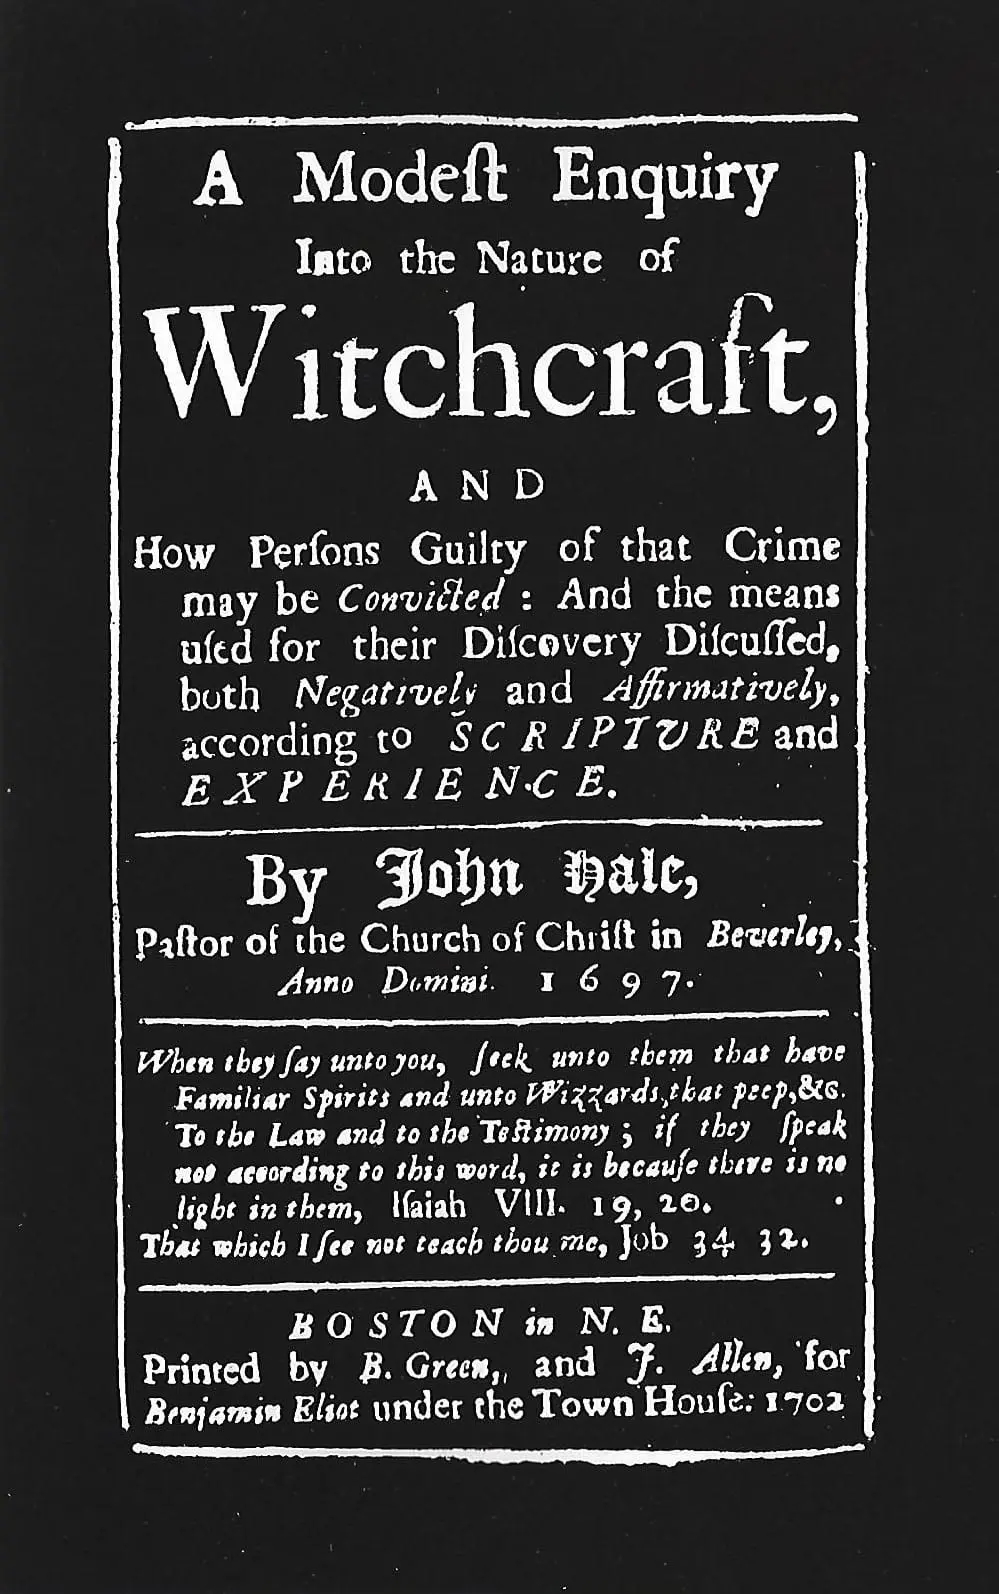 A Modest Enquiry Into the Nature of - Salem Witch Museum